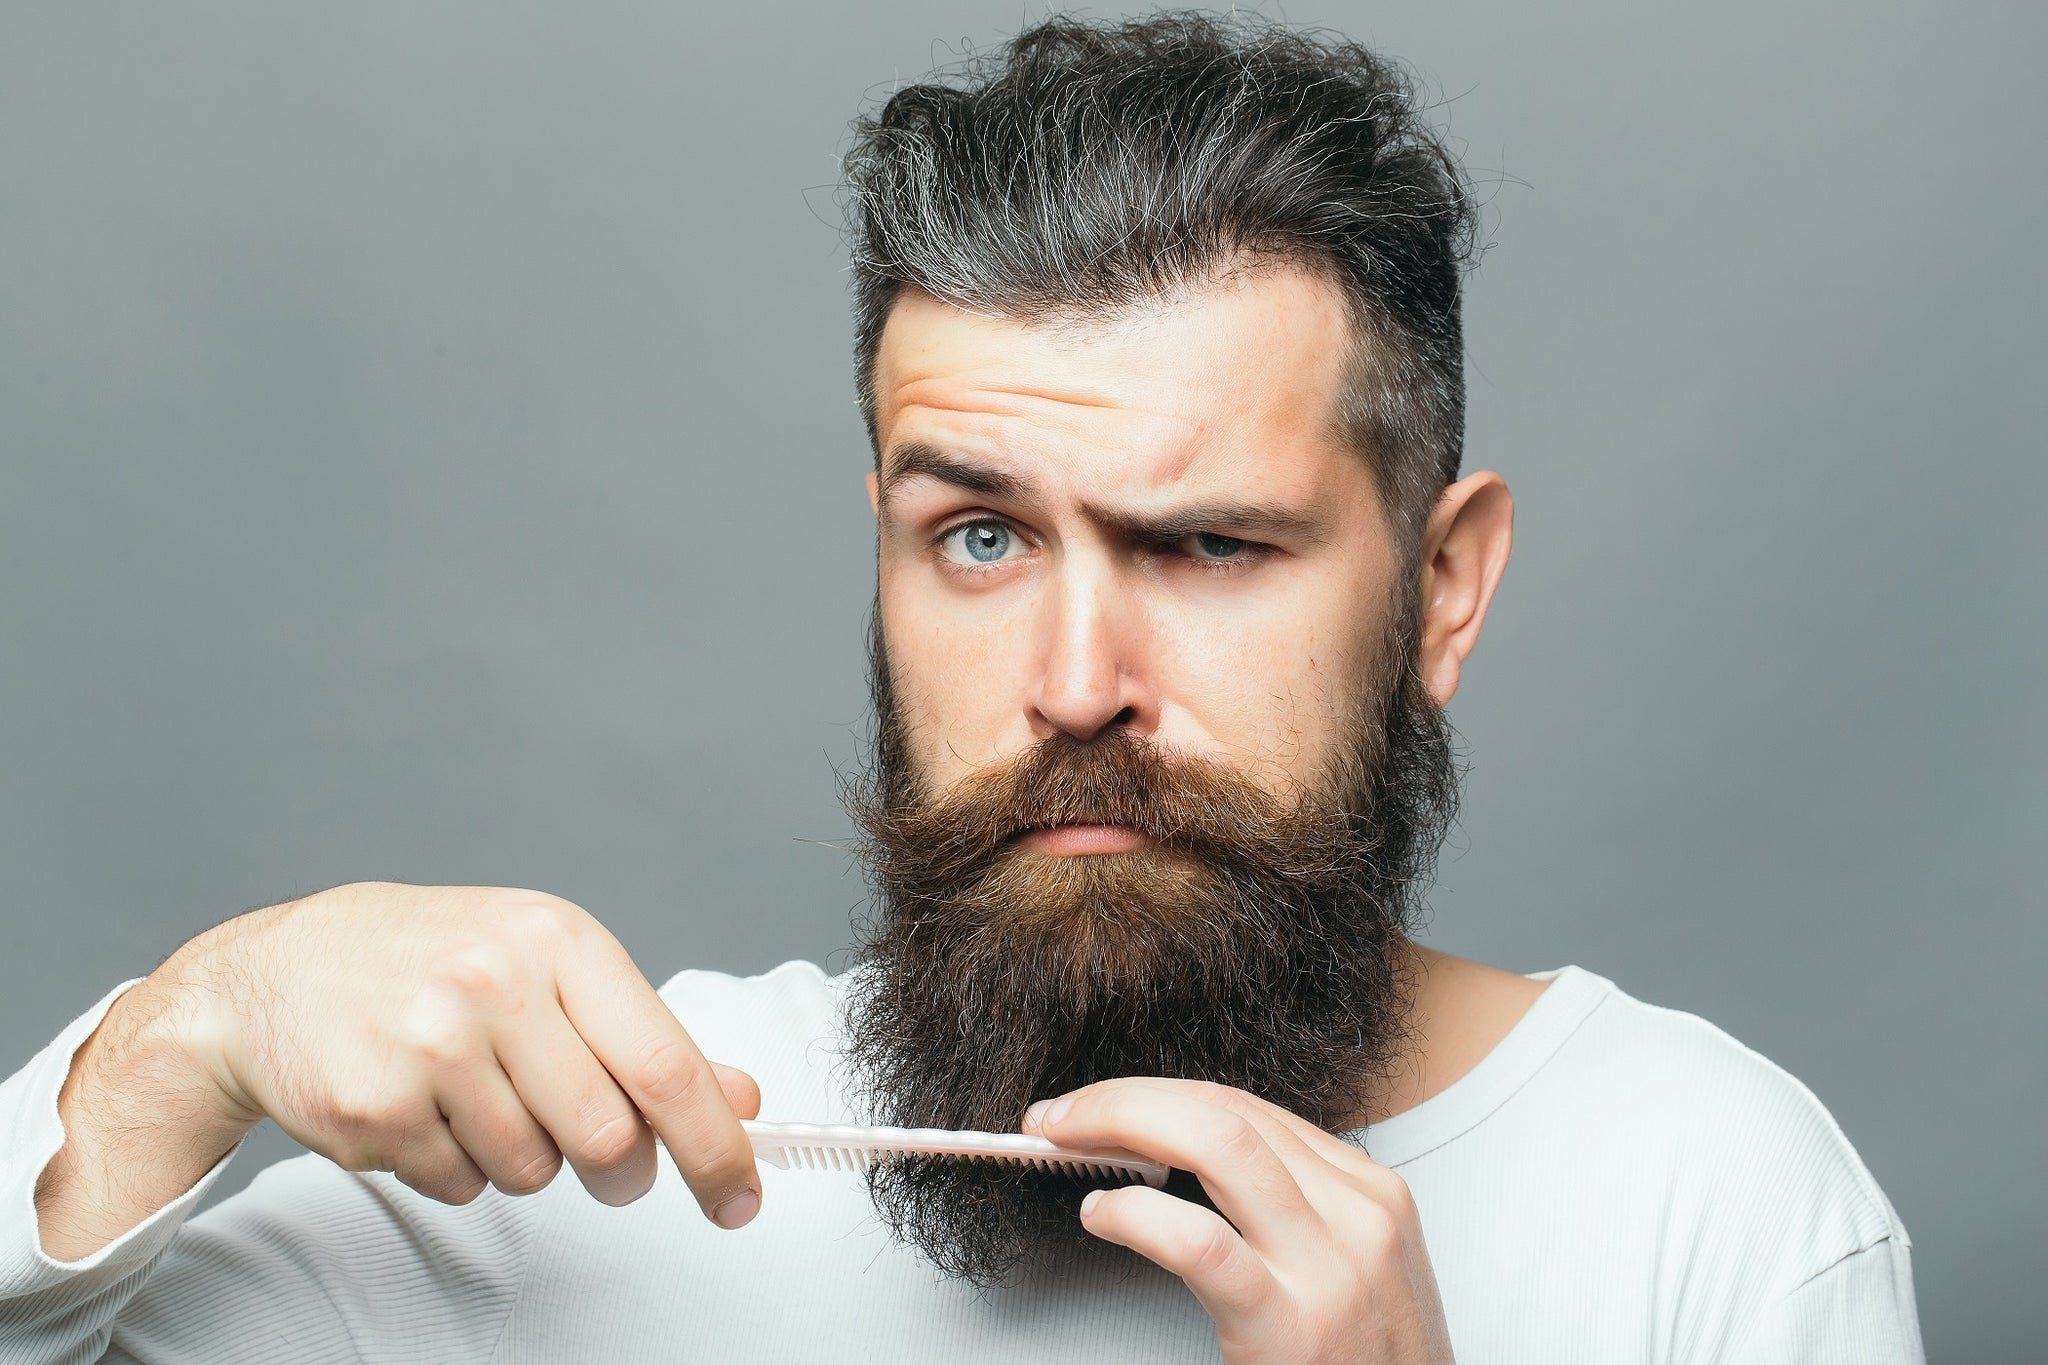 When Is Facial Hair Growth a Sign of a Hormonal Imbalance